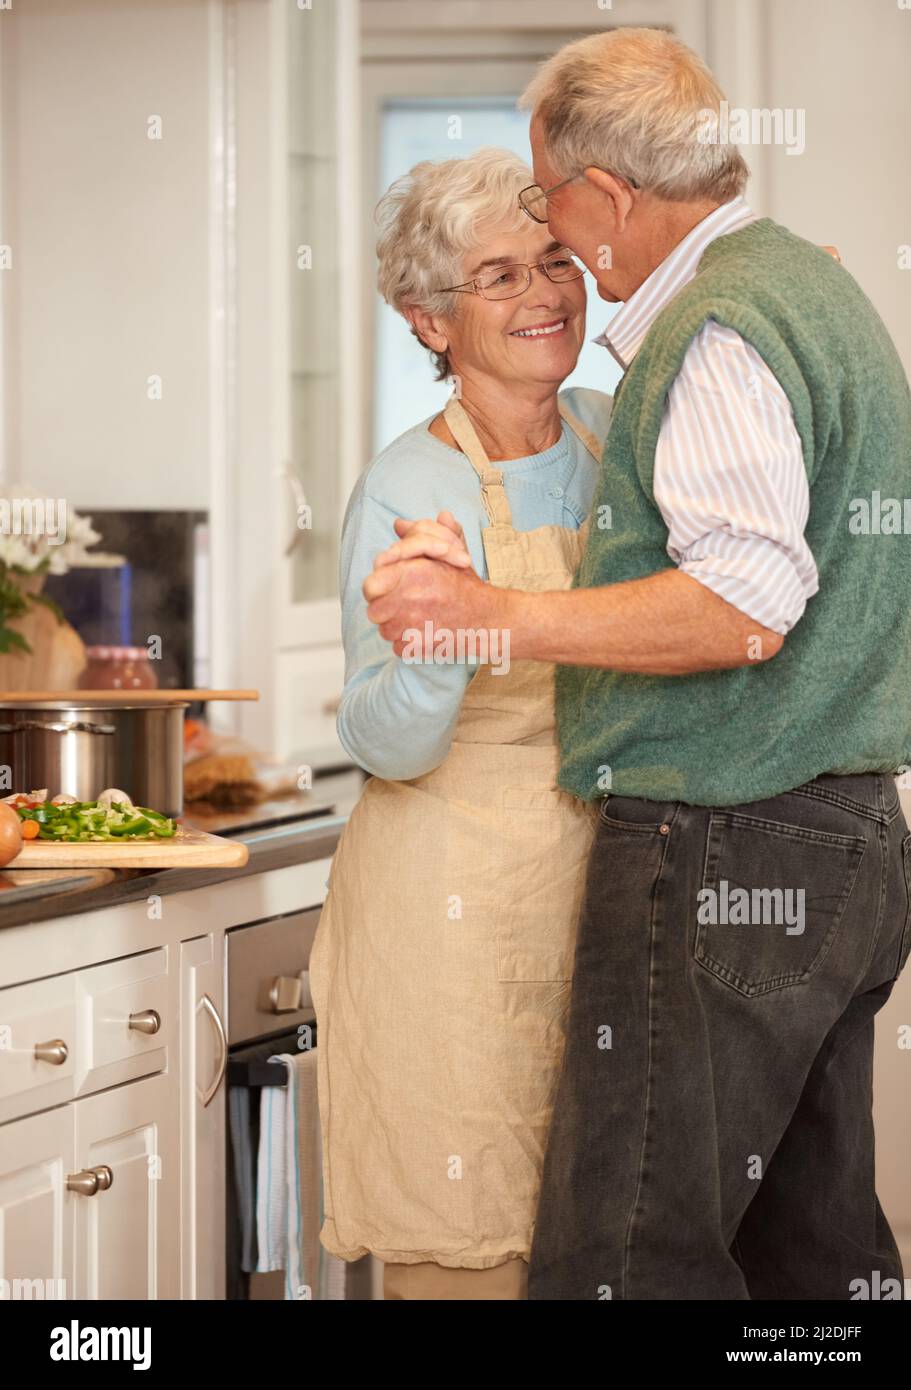 Moments like these are beautiful. Shot of a senior couple enjoying a playful moment together in the kitchen. Stock Photo